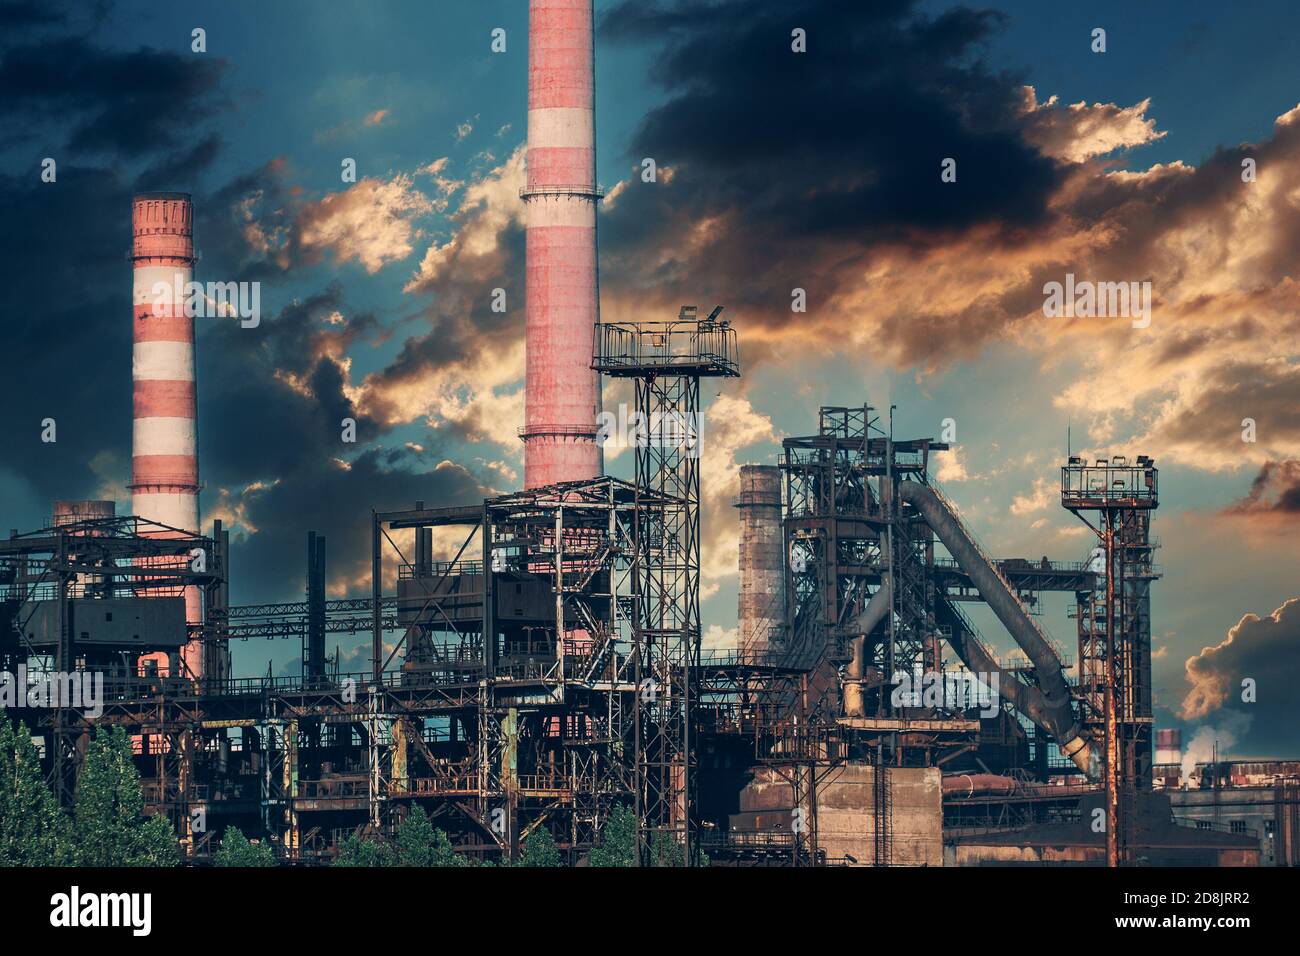 Petrochemical industrial factory of heavy industry, power refinery production with smoke pollution. Stock Photo